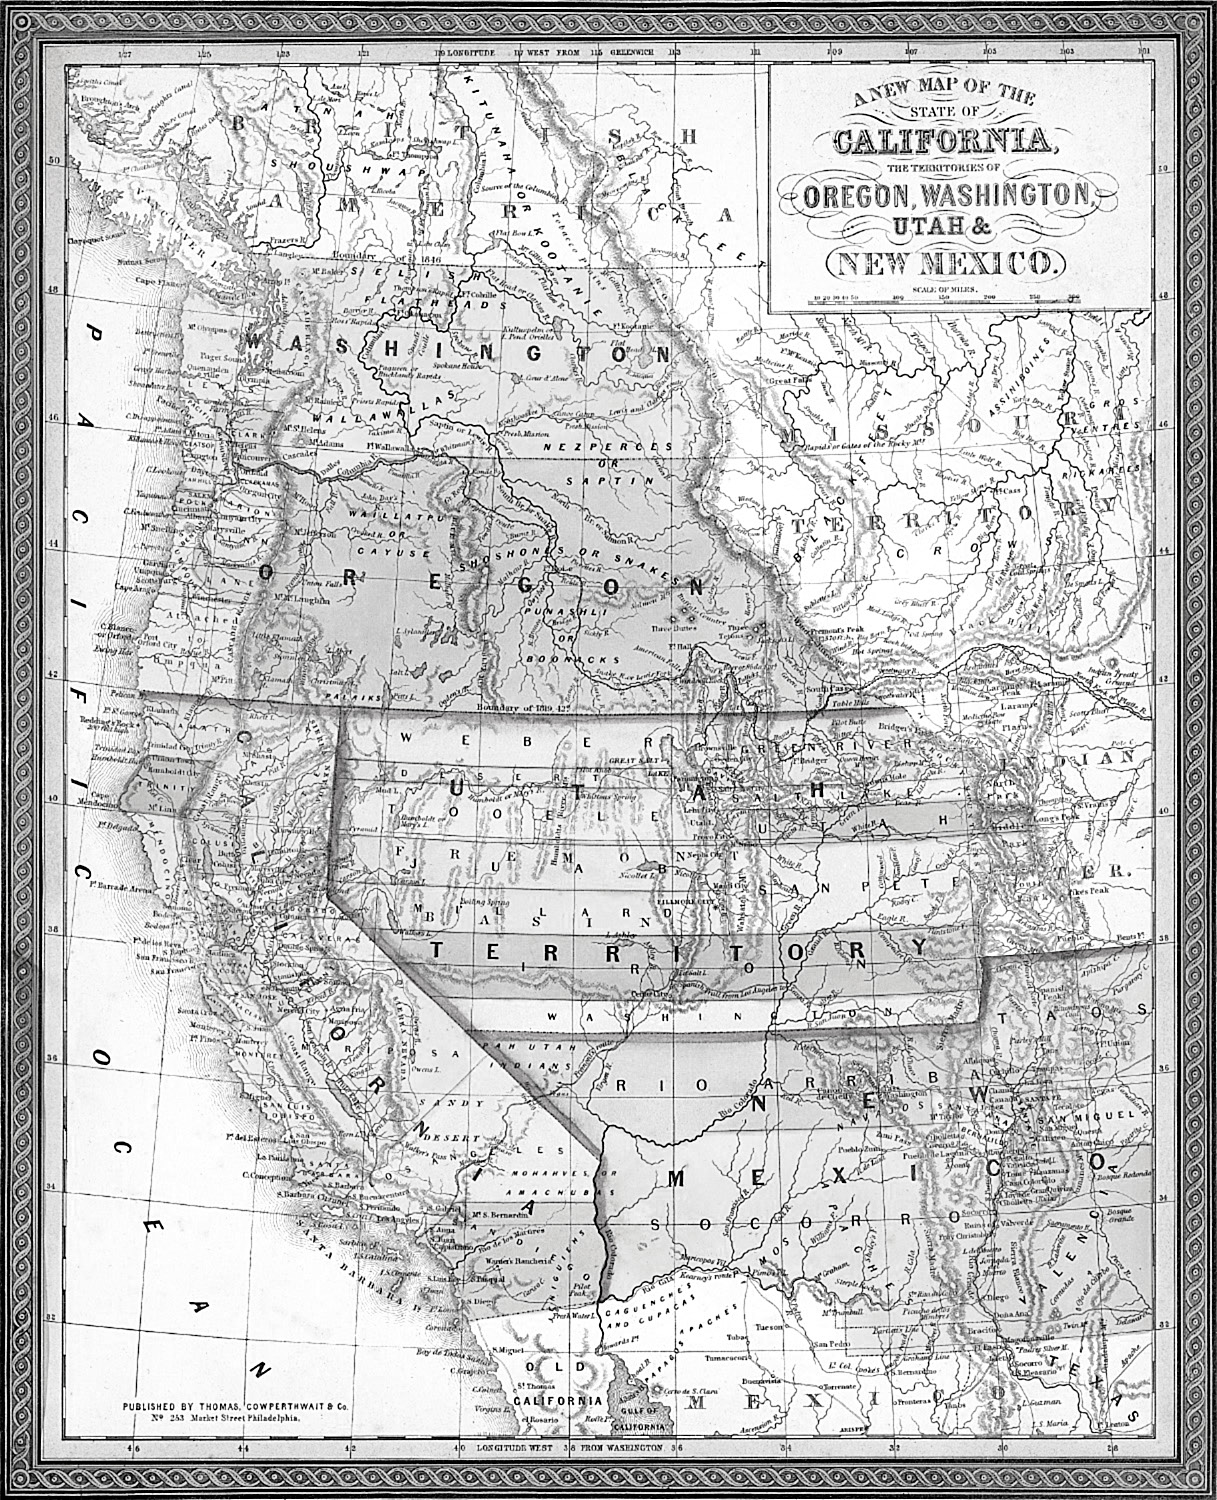 Utah Territory, showing the Utah War’s scope and sweep. During this conflict Utah Territory was 700 miles wide. By 1858 the war had touched virtually the entire American West with international impact on the Pacific Coast possessions of Russia and Great Britain as well as northern Mexico, Spanish Cuba, coastal Central America, the Kingdom of Hawaii, and the Dutch East Indies. Map (1853) by Thomas Cowperthwait & Co., Philadelphia, from the author’s collection.